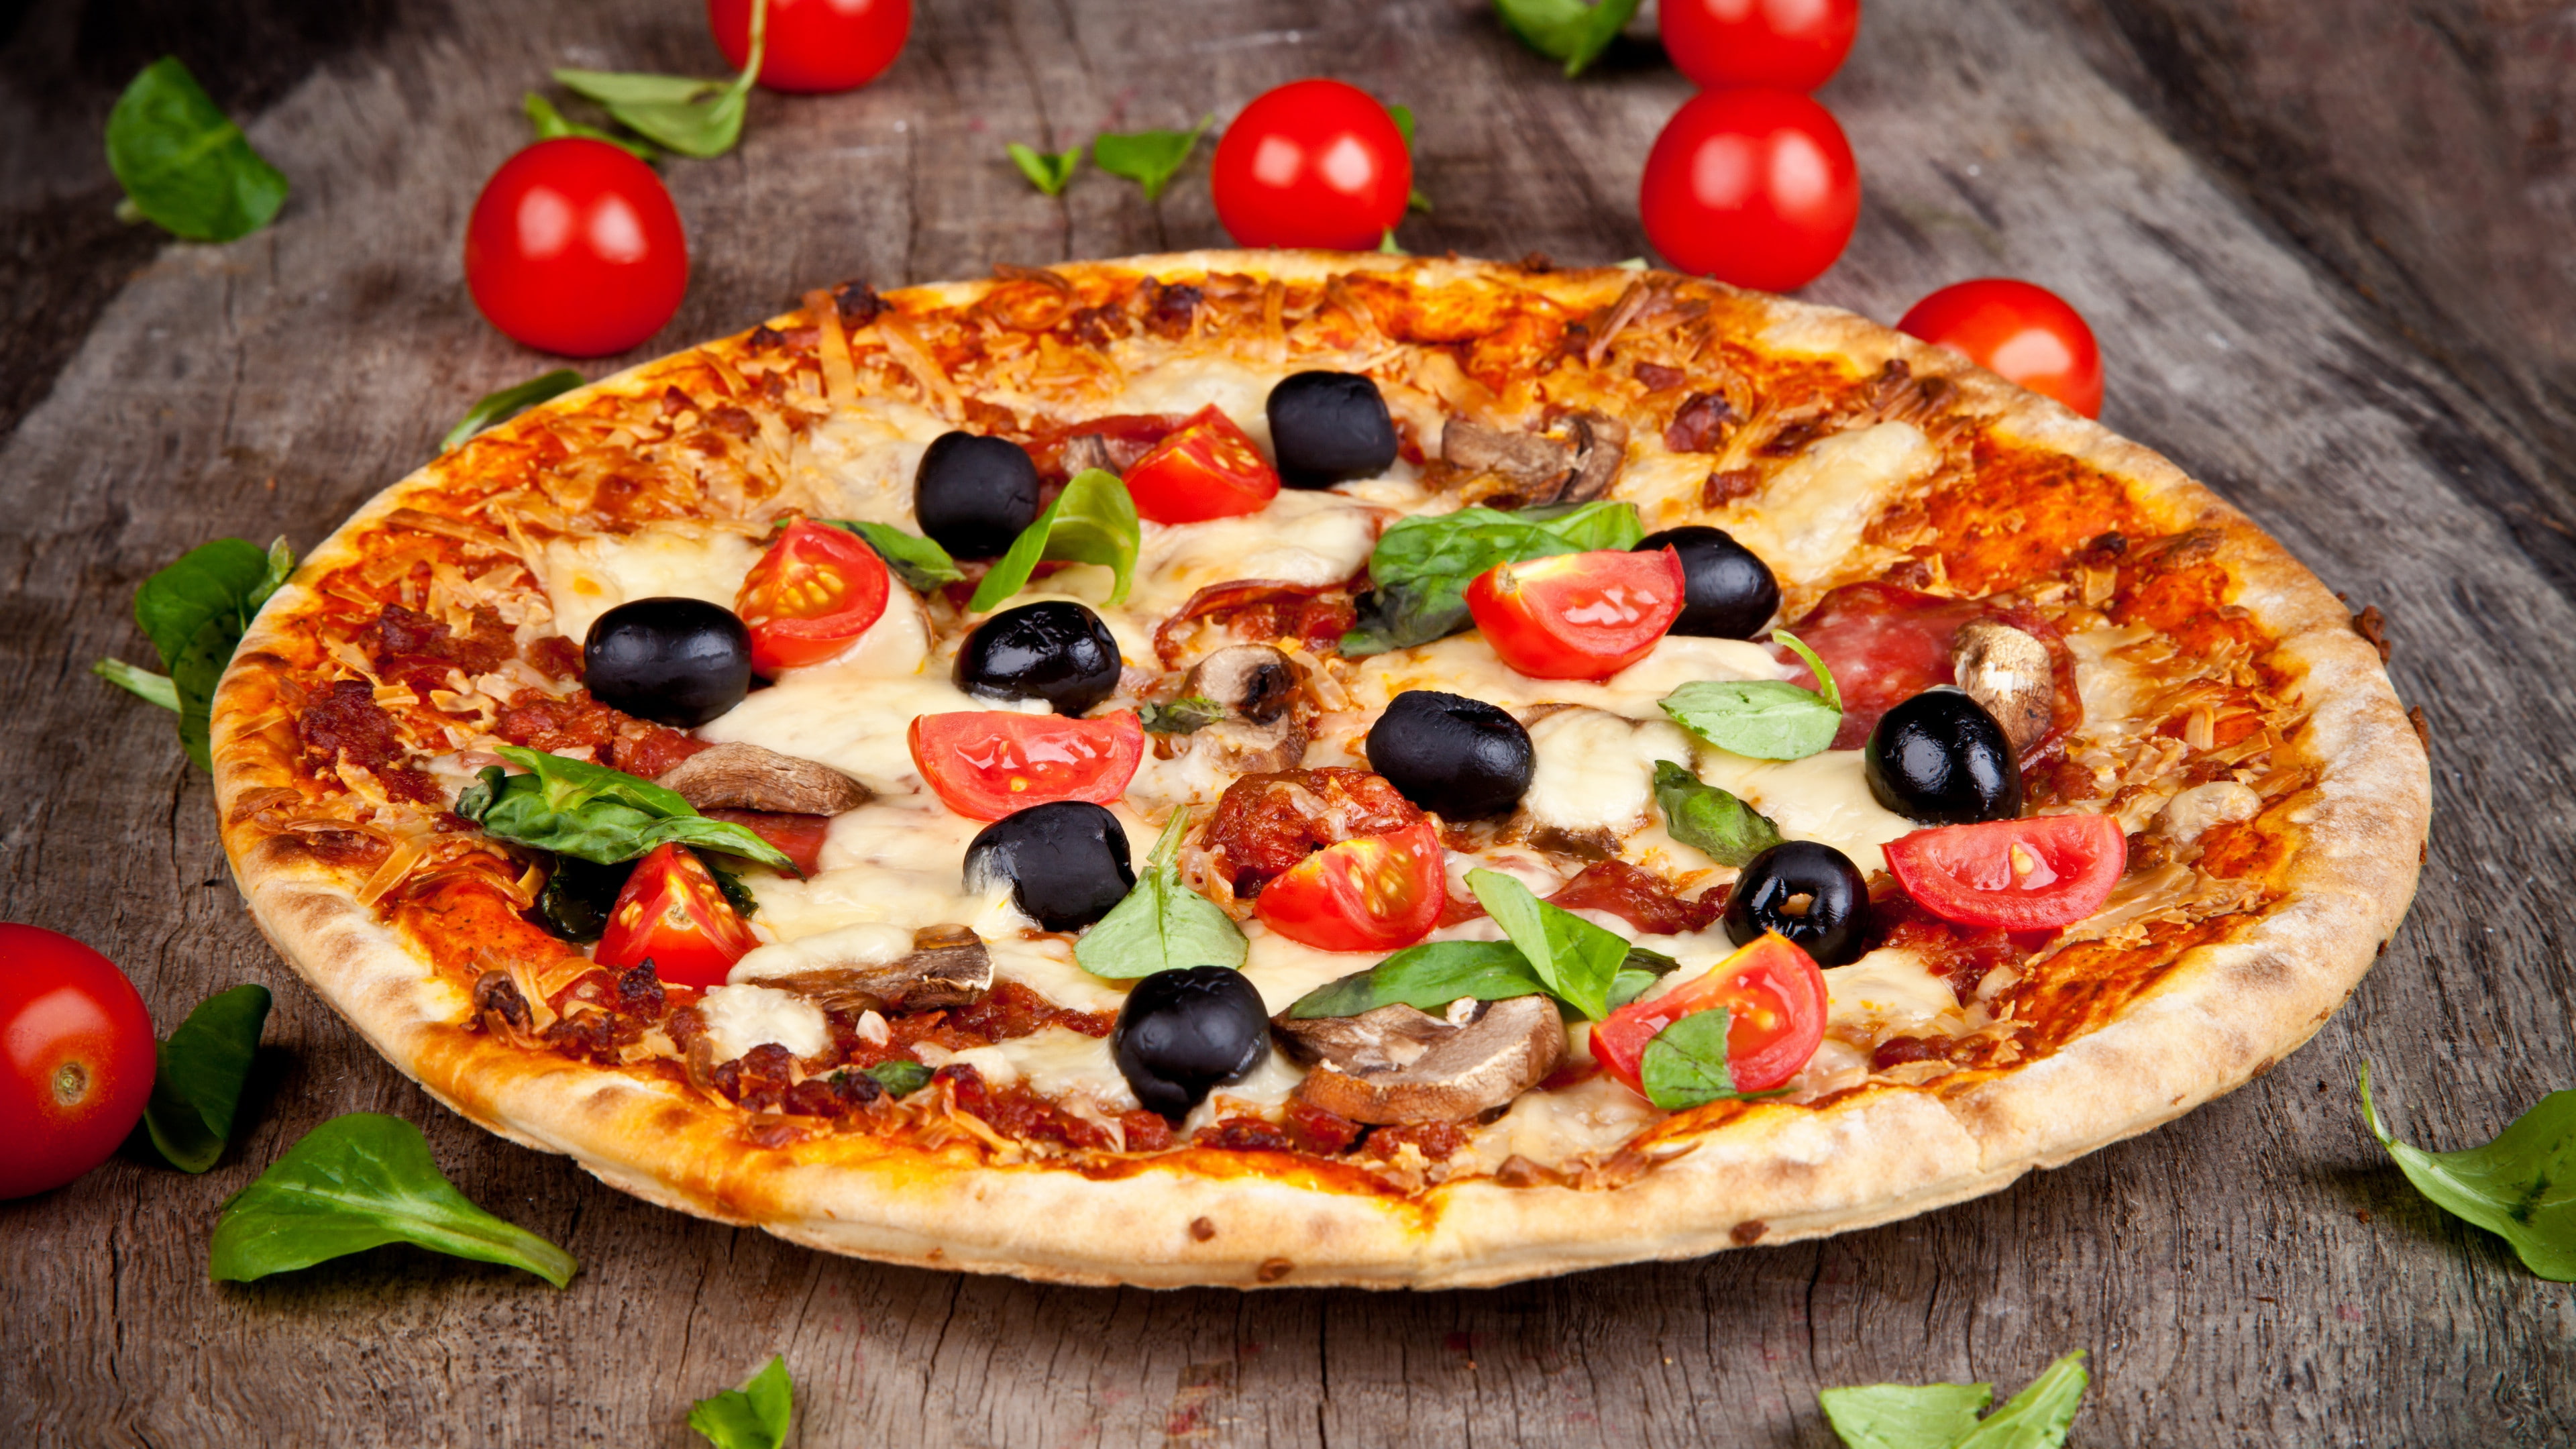 pizza, tomatoes backgrounds, olives, mushrooms, cheese, dish